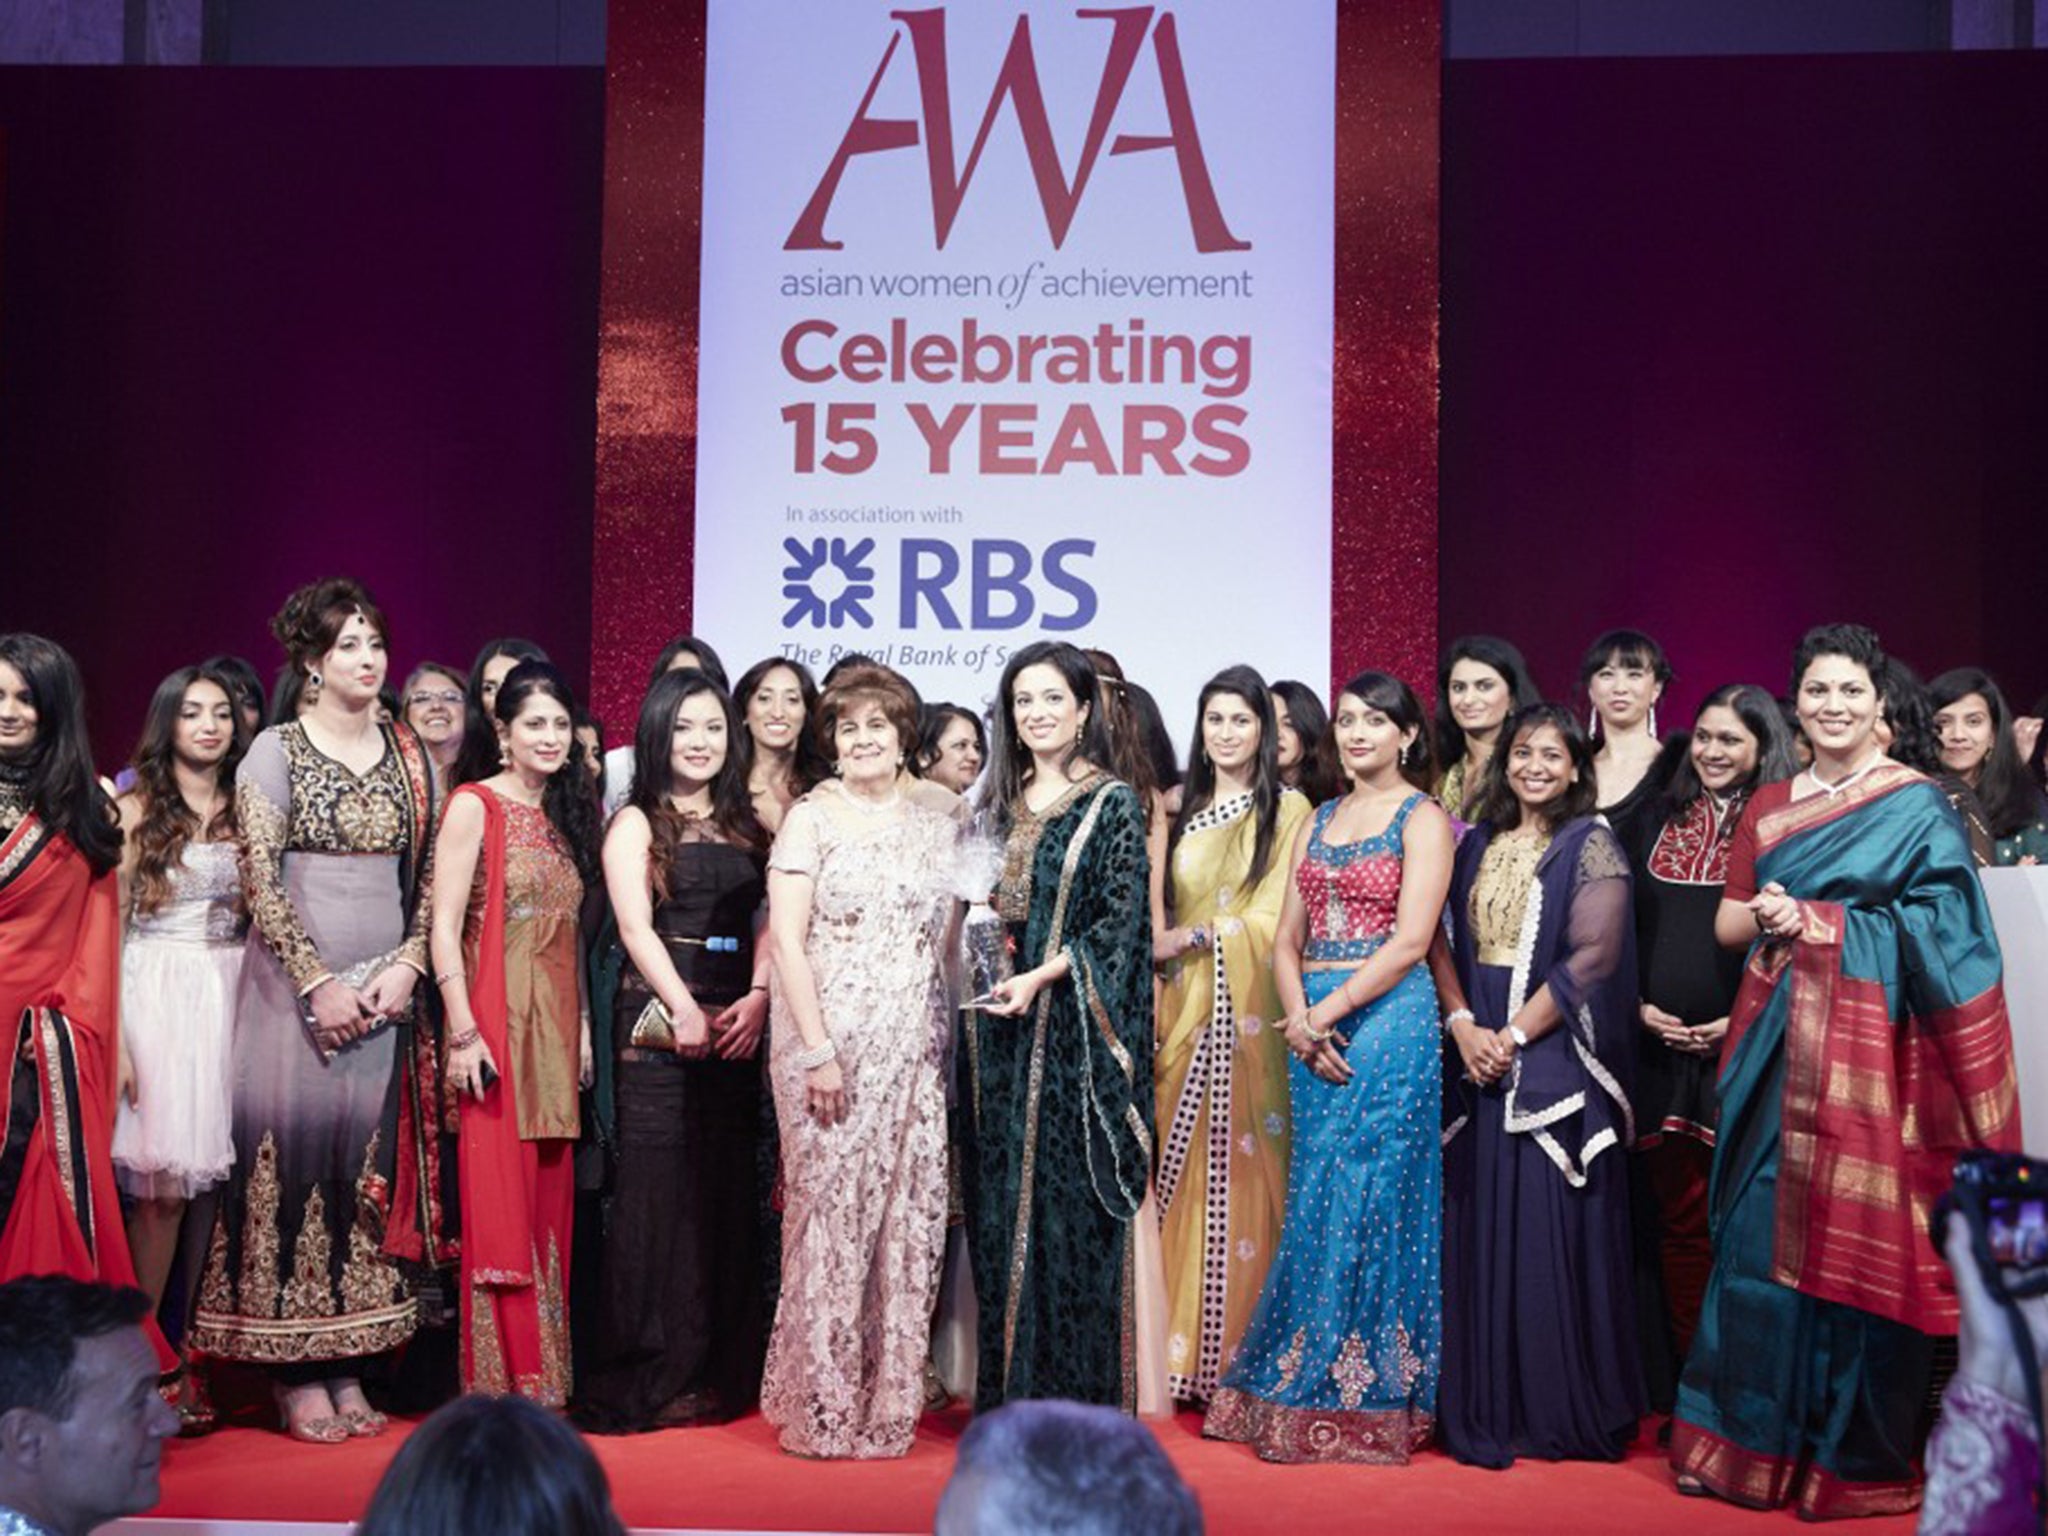 The Asian Women of Achievement Awards is now in its 16th year